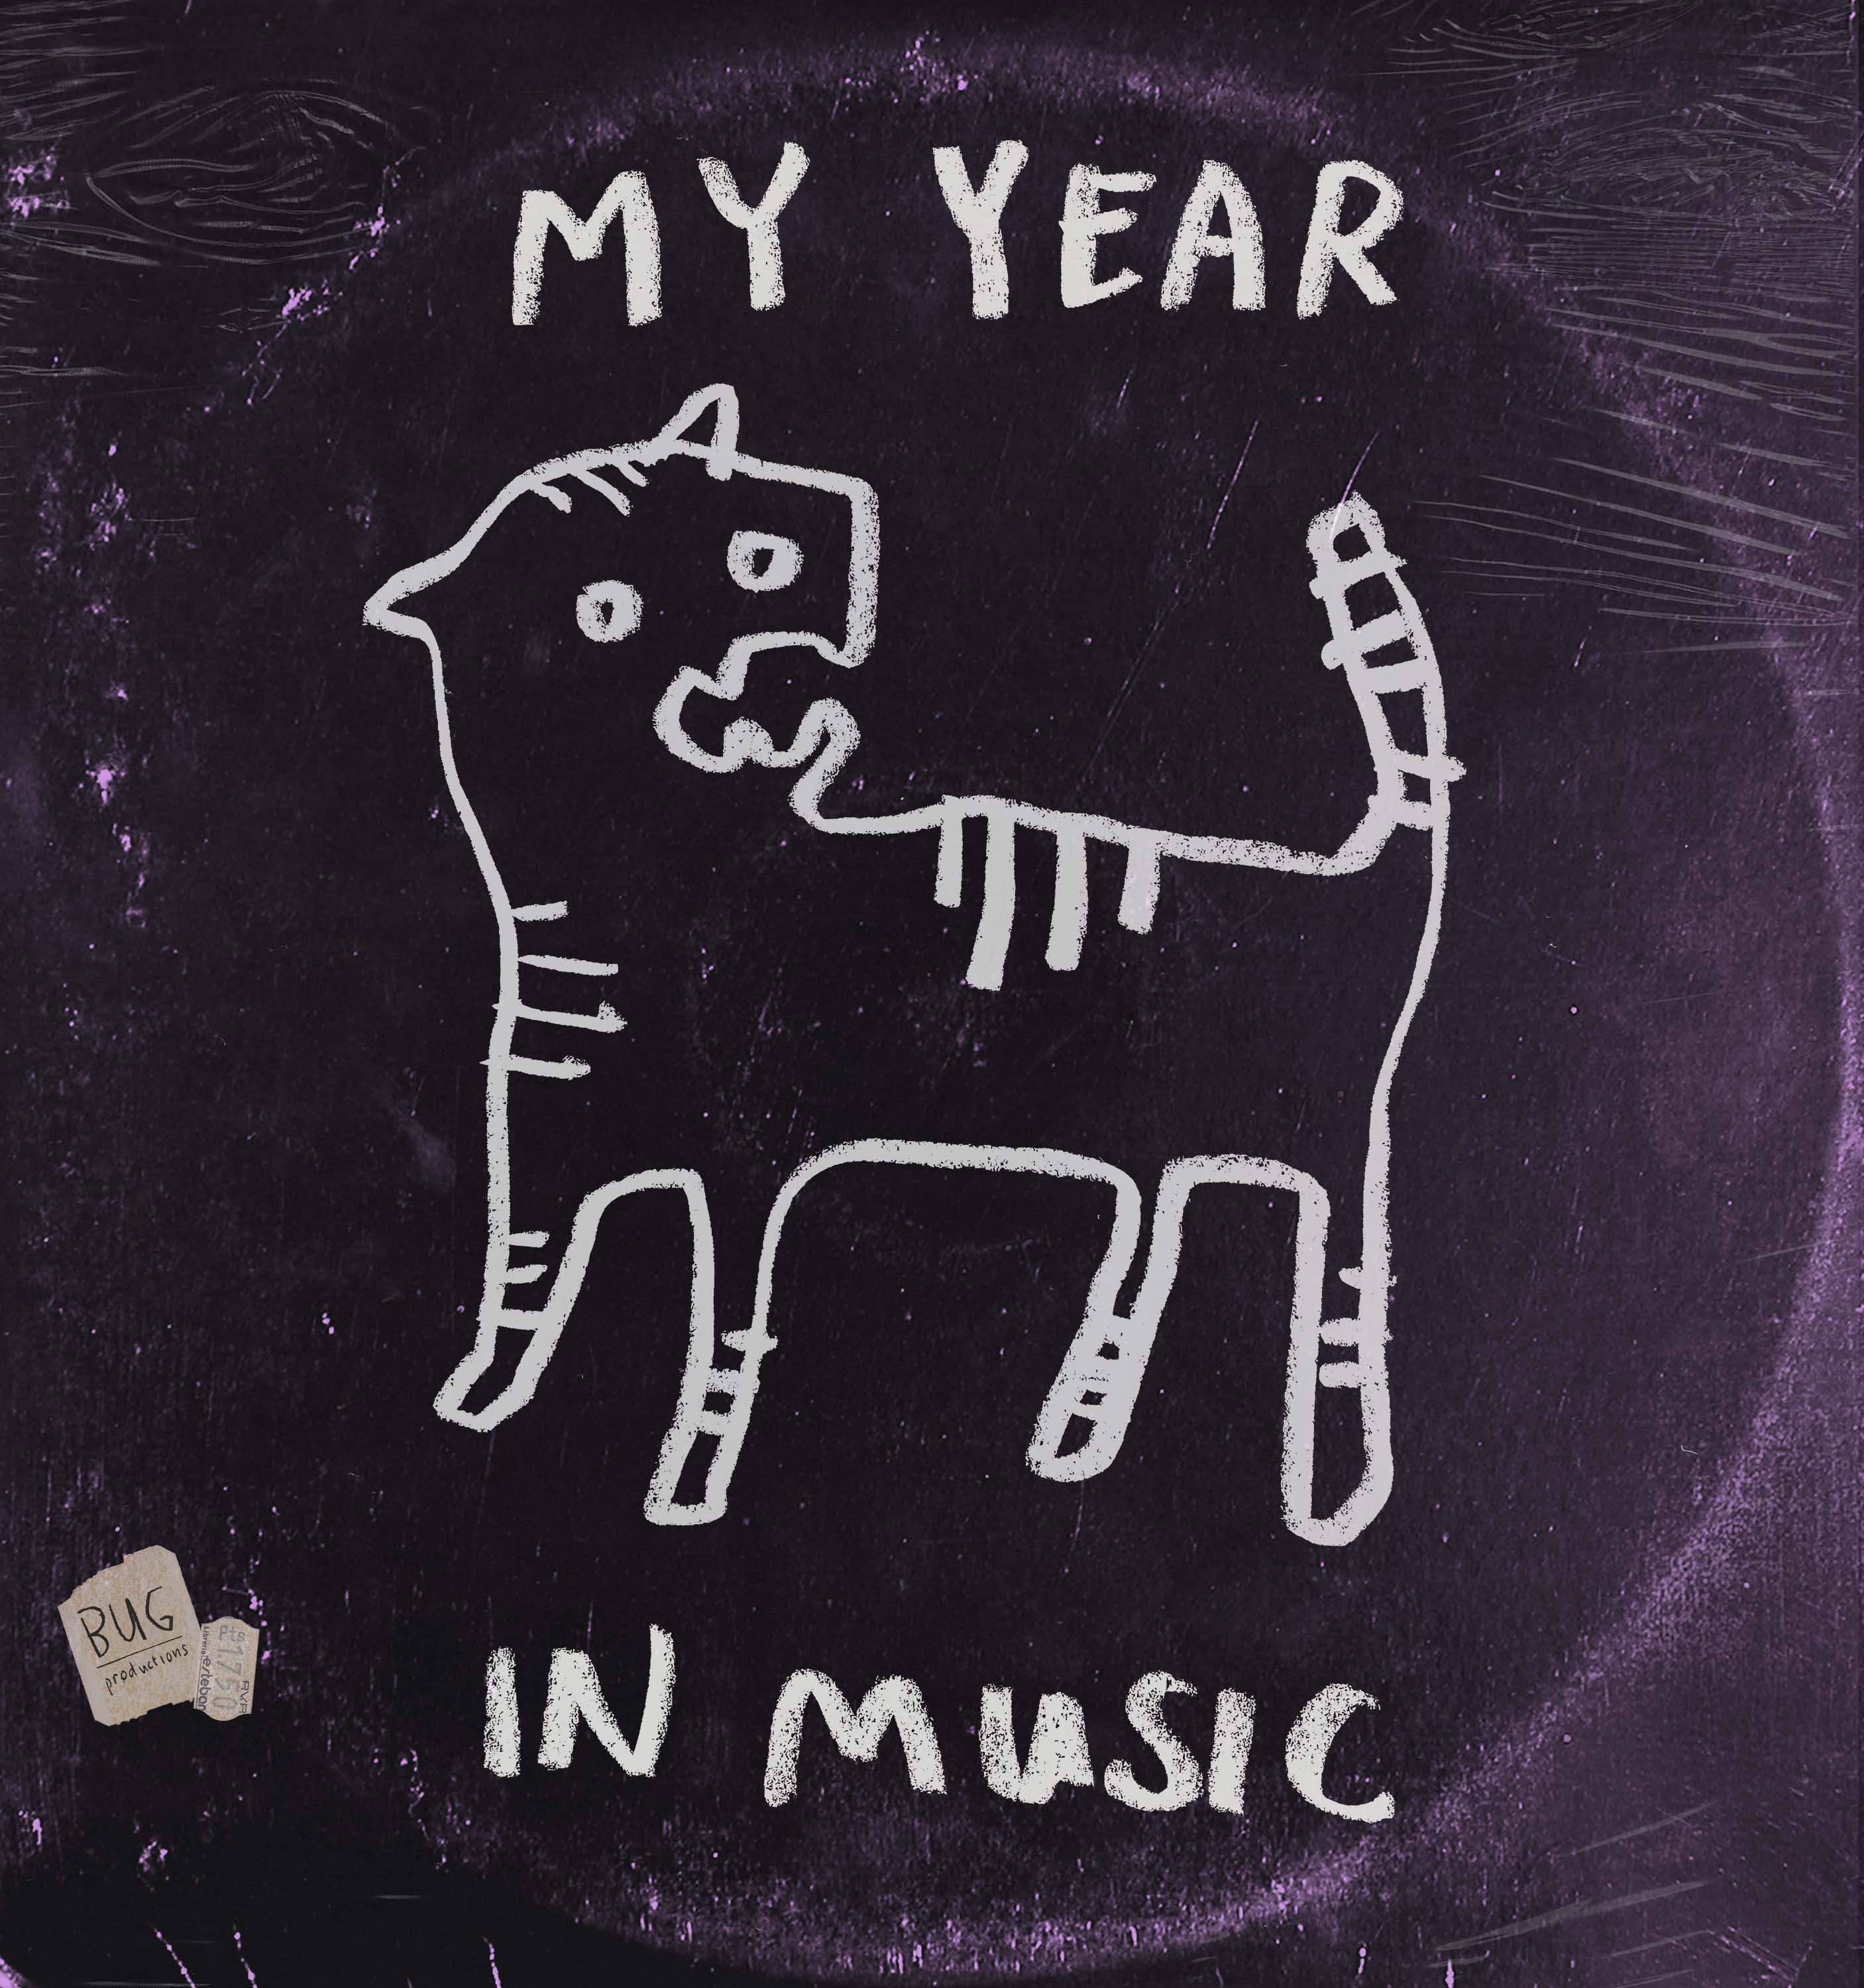 My Year In Music